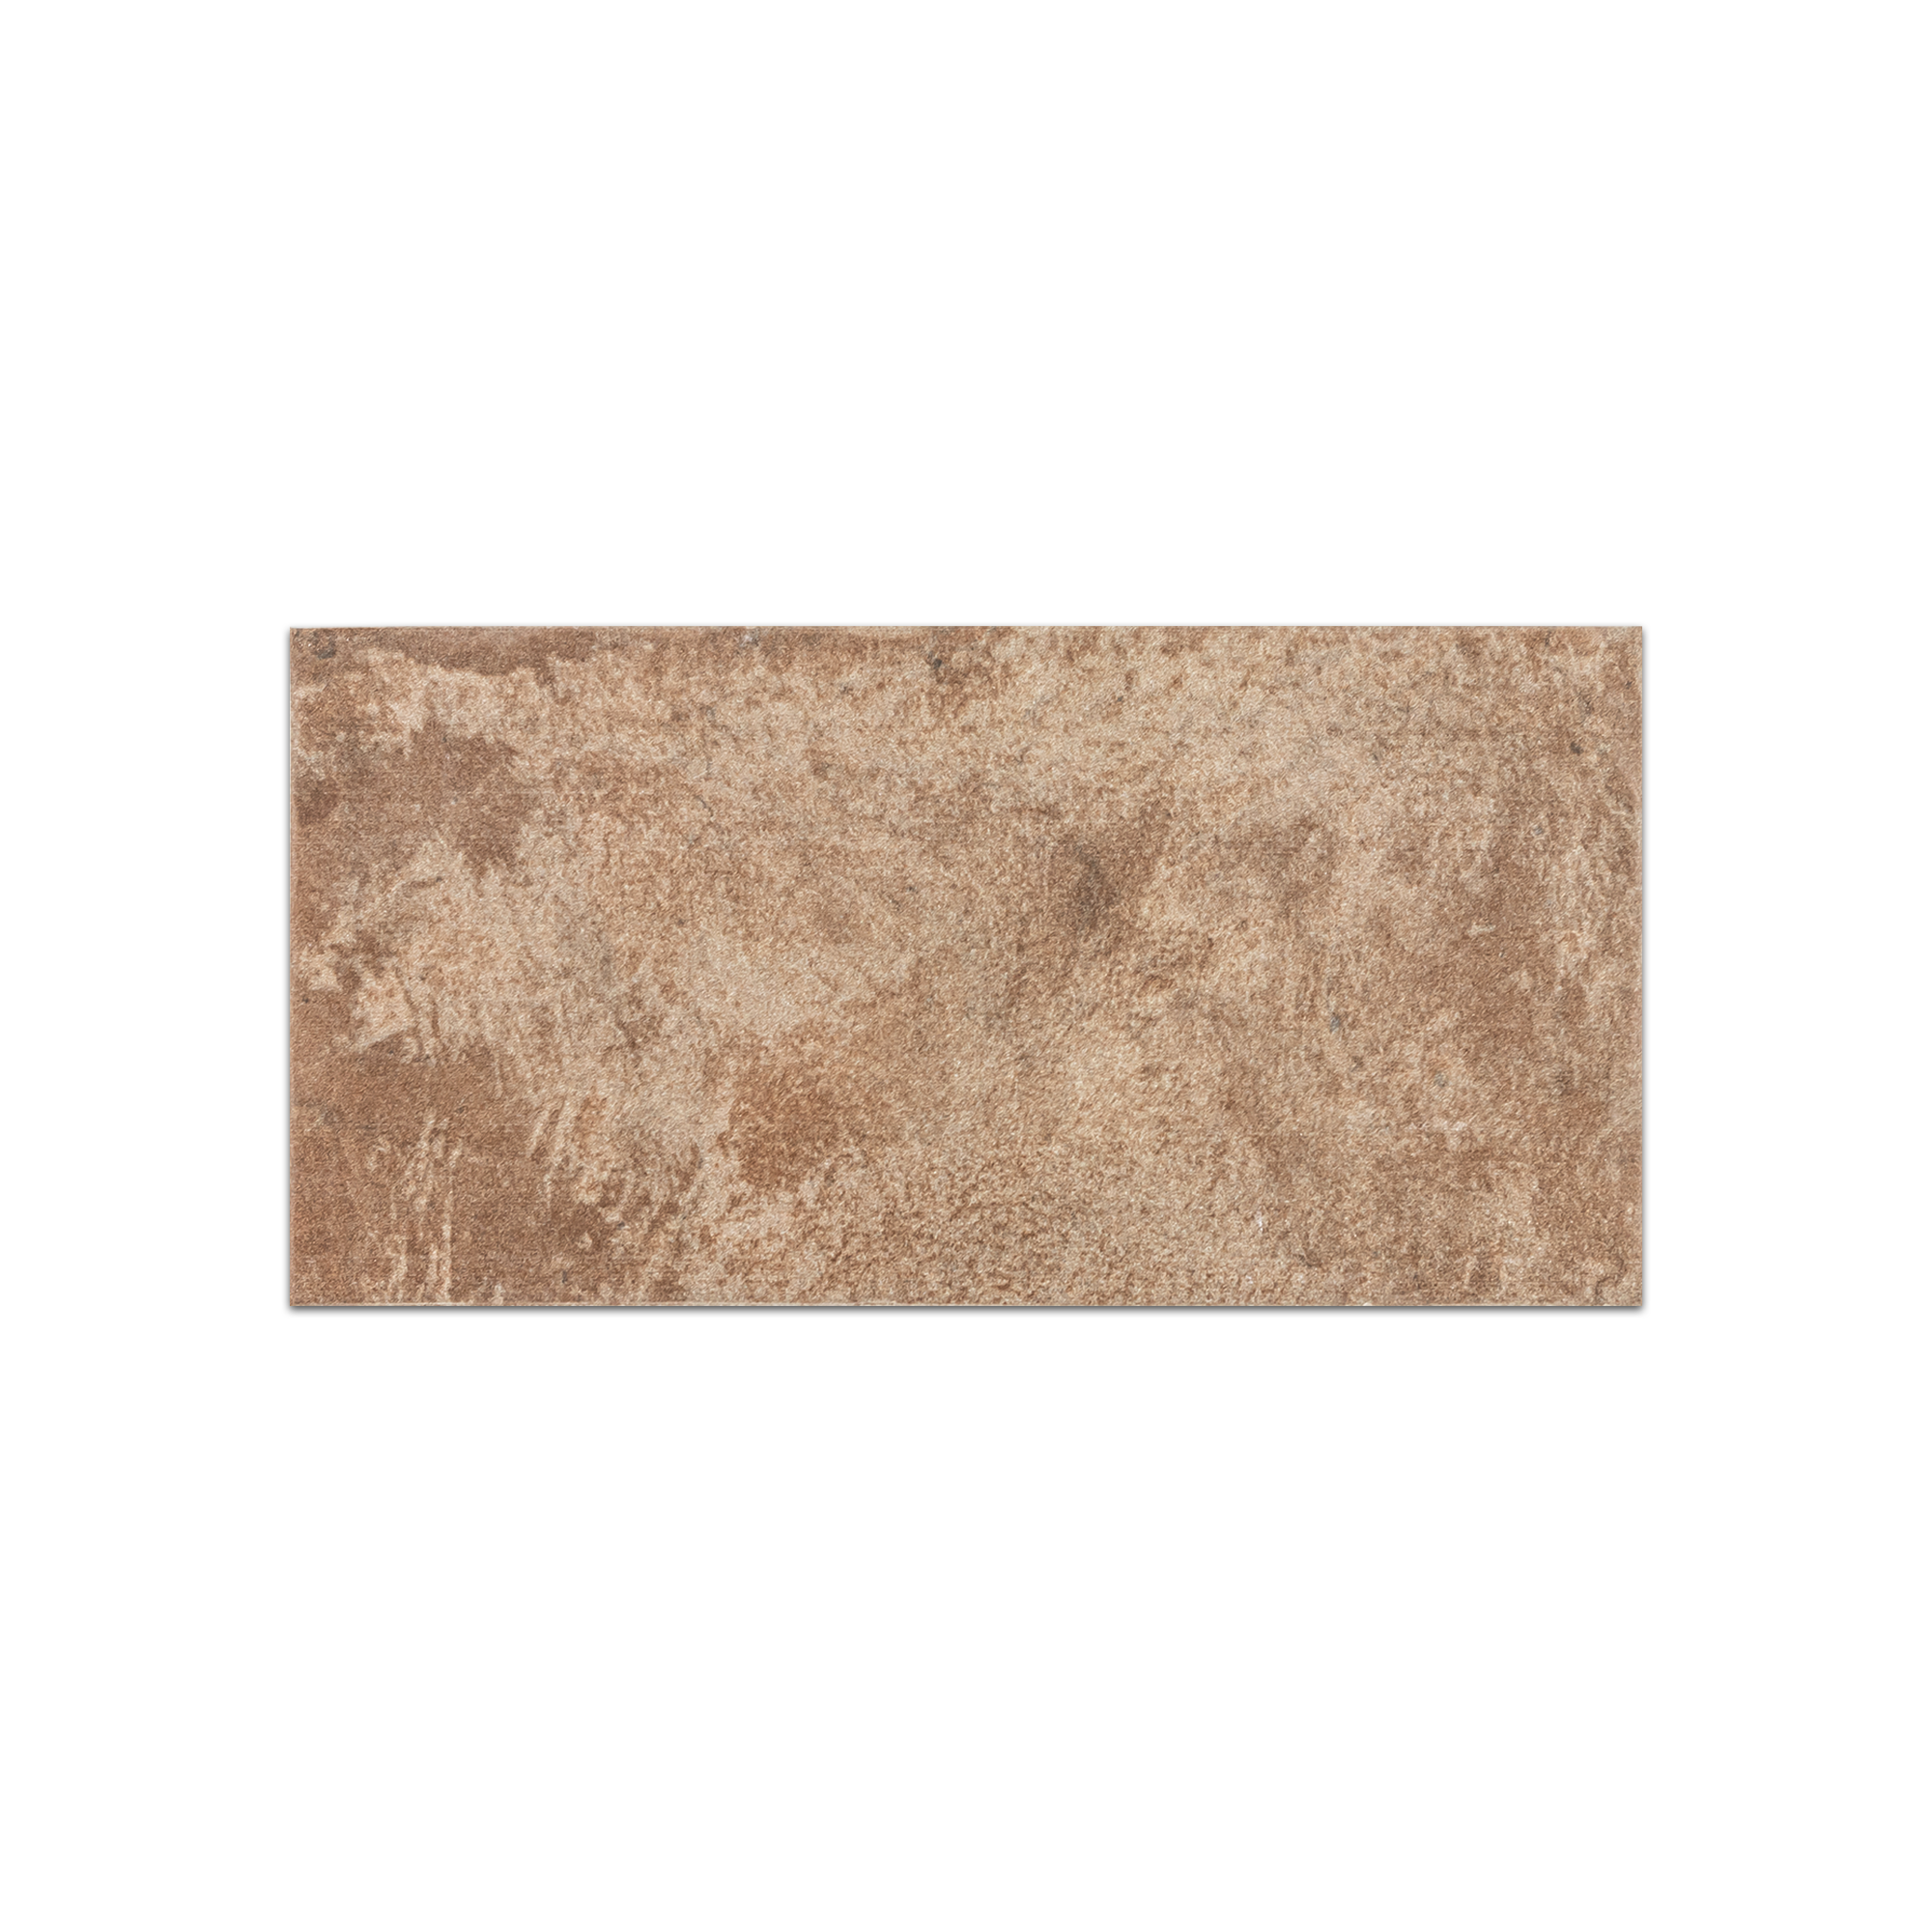 Elon Boston Brick South Porcelain Rectangle Field Tile, 4.3x8.8 inches, Natural Pressed Finish, SKU BC133, by Surface Group.